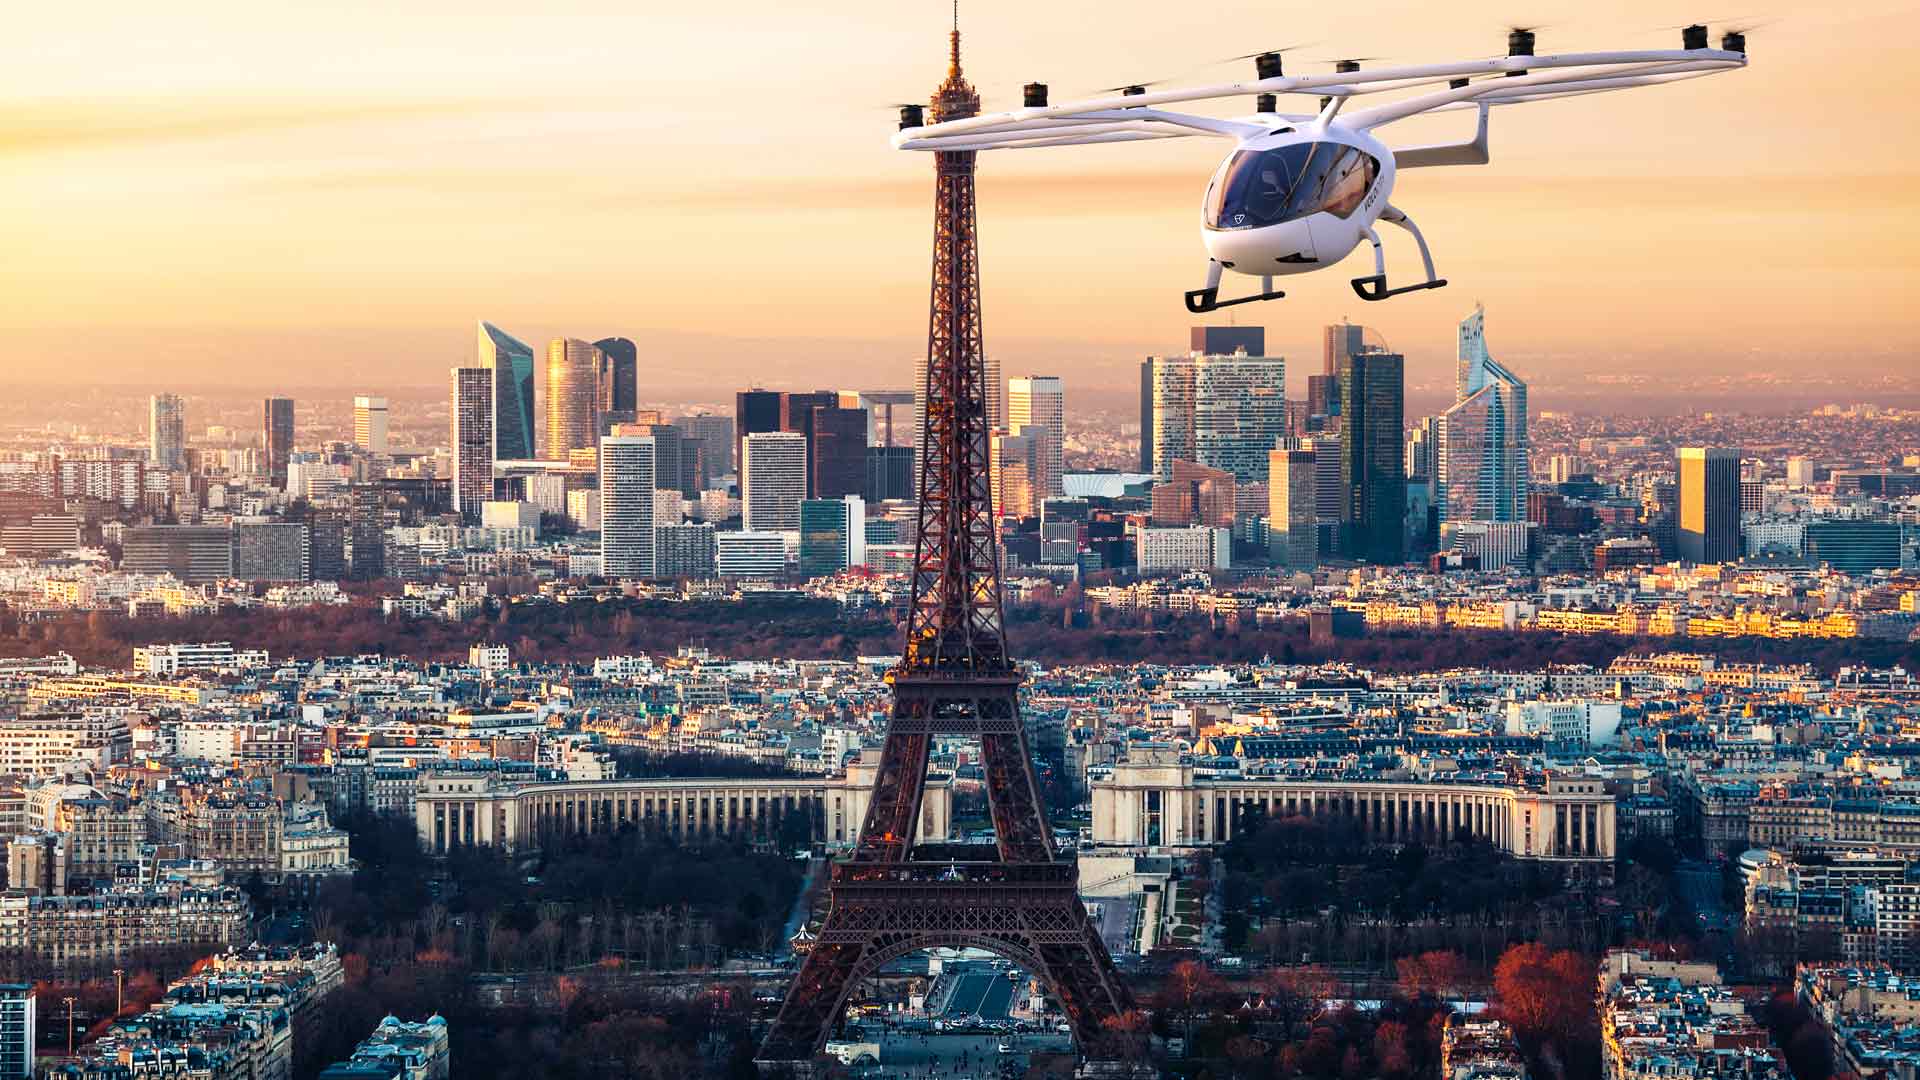 Meet the Winners Who Will Be Leading the Future of Urban Air Mobility in Paris Region! - 049_VoloCity-flies-over-Paris_download-officiel-site-volocopter_1920x1080 